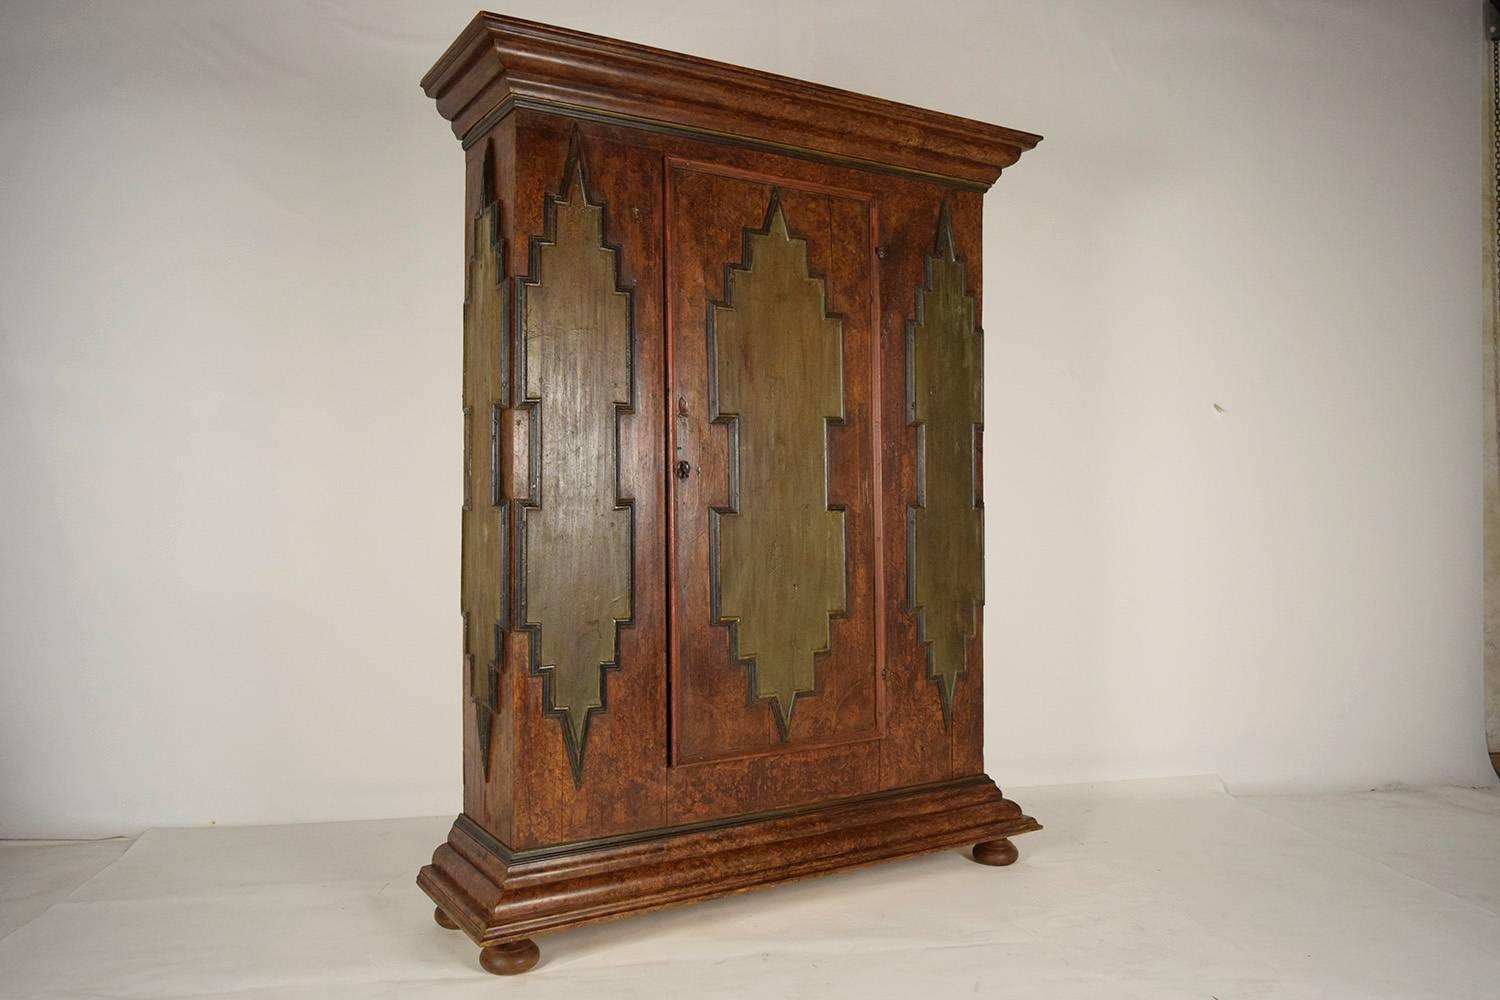 This 1880's Baroque Style Single Door Armoire is made from solid wood with its original multi-color finish and waxed patina finish. The armoire features a large crown and base molding on the top and bottom and on the sides and front, there is